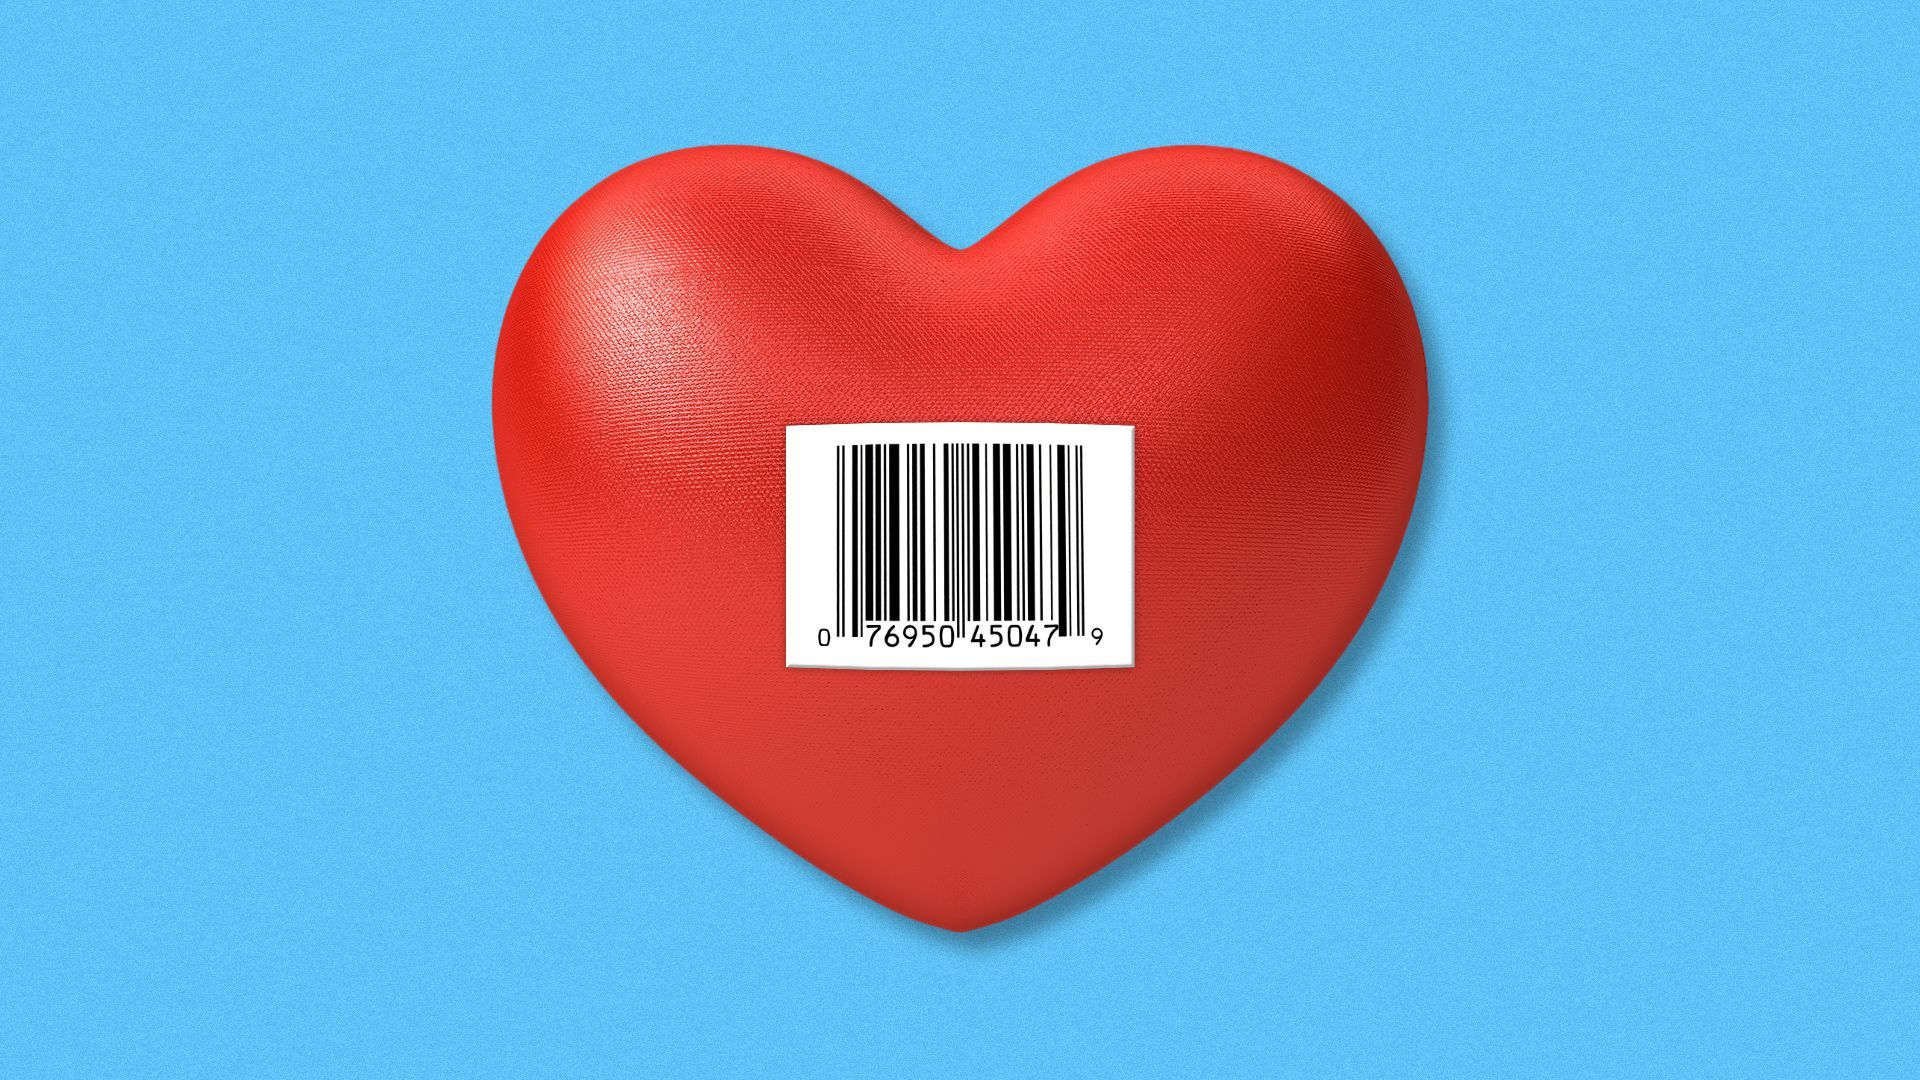 Illustration of a heart with a barcode sticker on it.